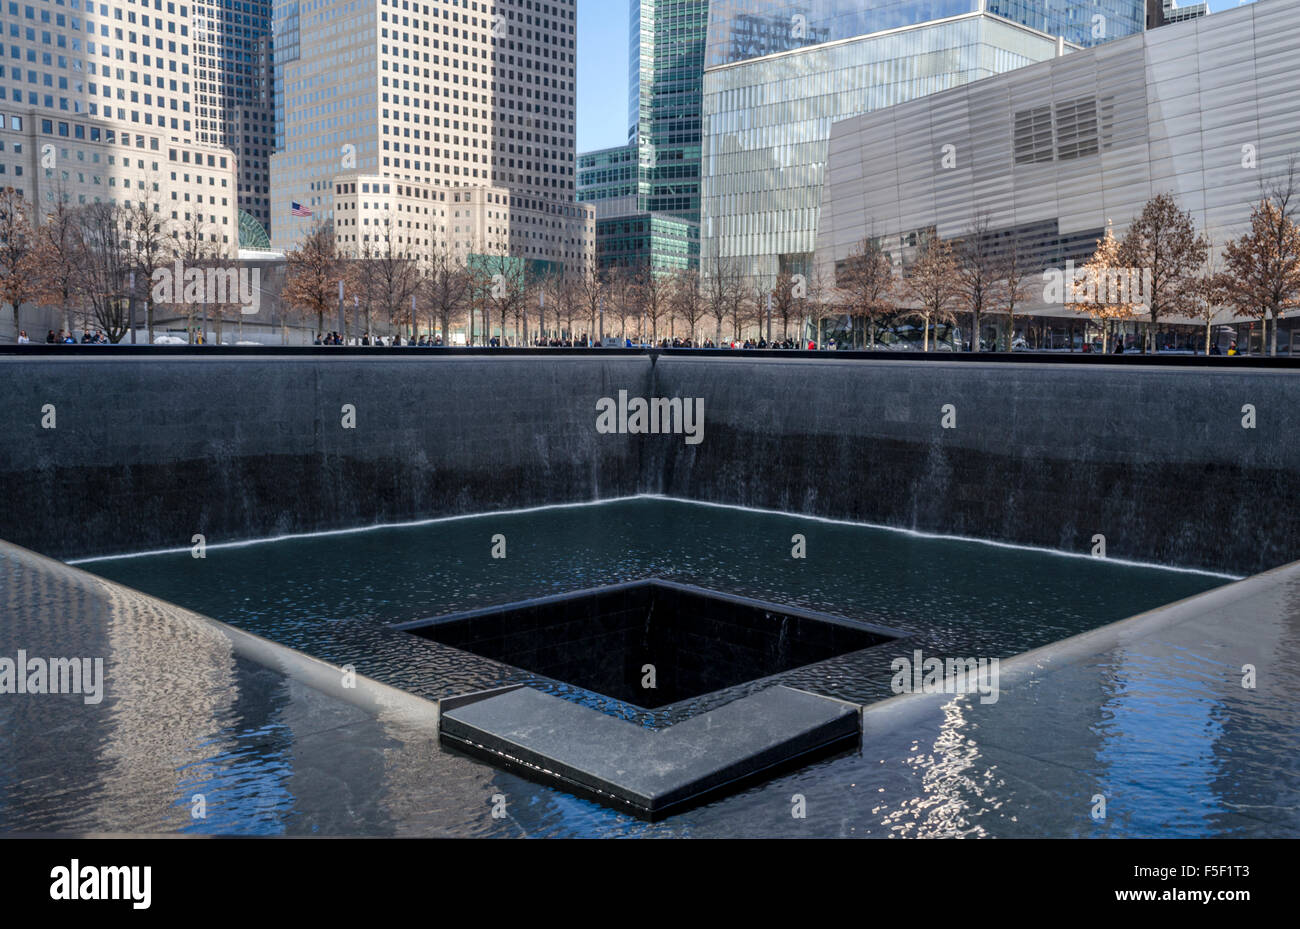 9/11 Memorial North Pool at the site of the World Trade Centre Towers, New York USA on a cold winter day Stock Photo